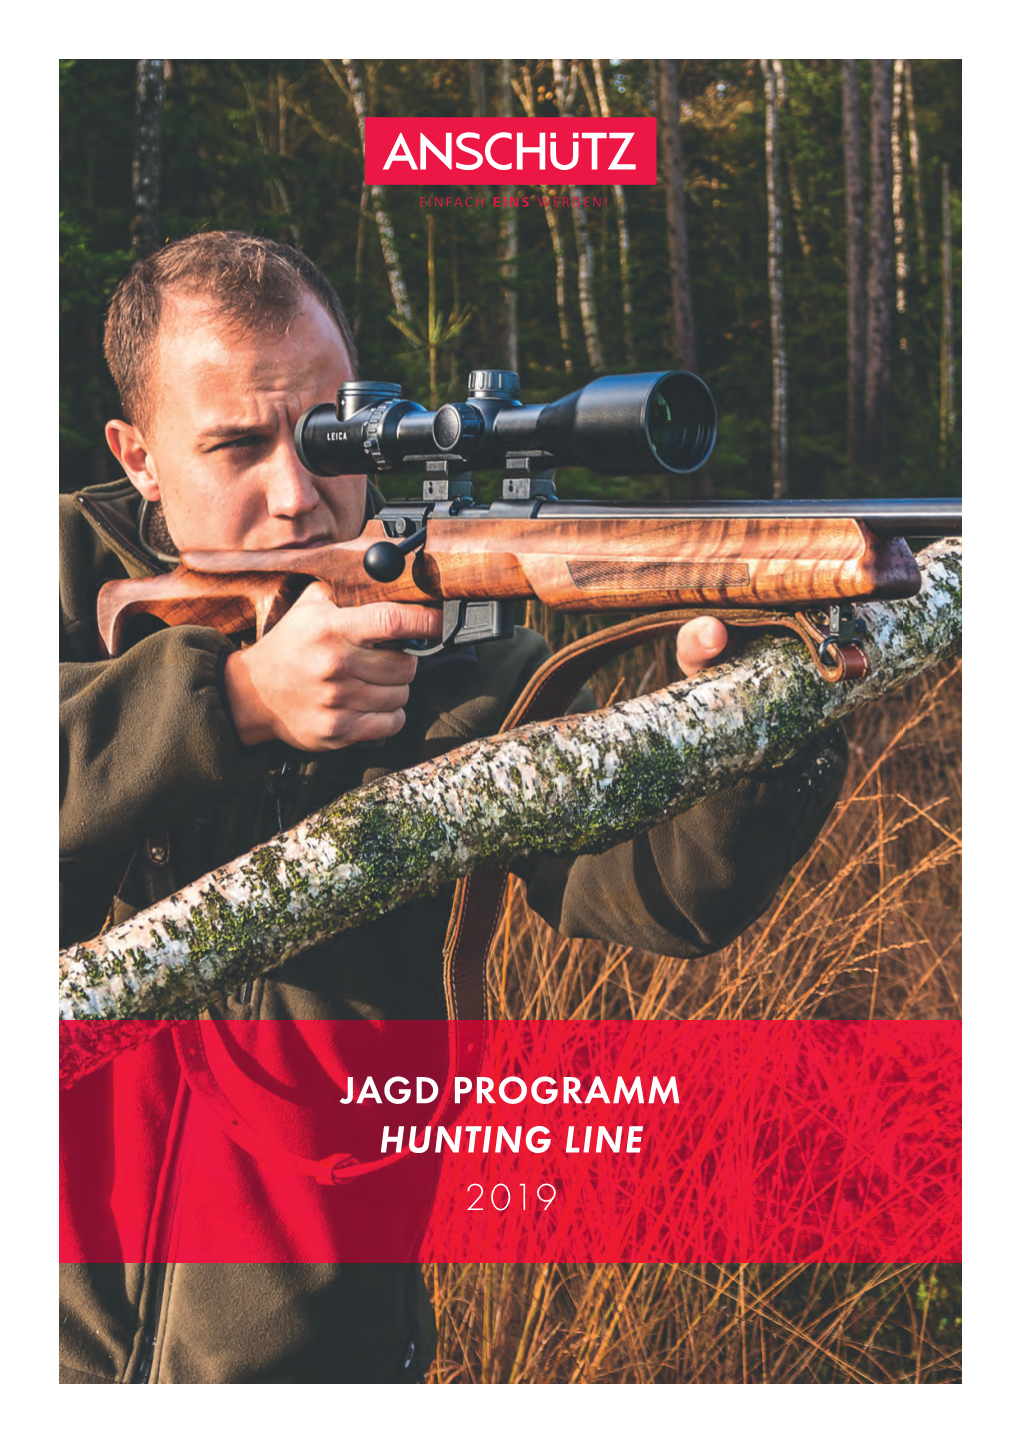 Jagd Programm Hunting Line 2019 Perfektion Ist Tradition – Seit 1856 Perfection Is Tradition – Since 1856